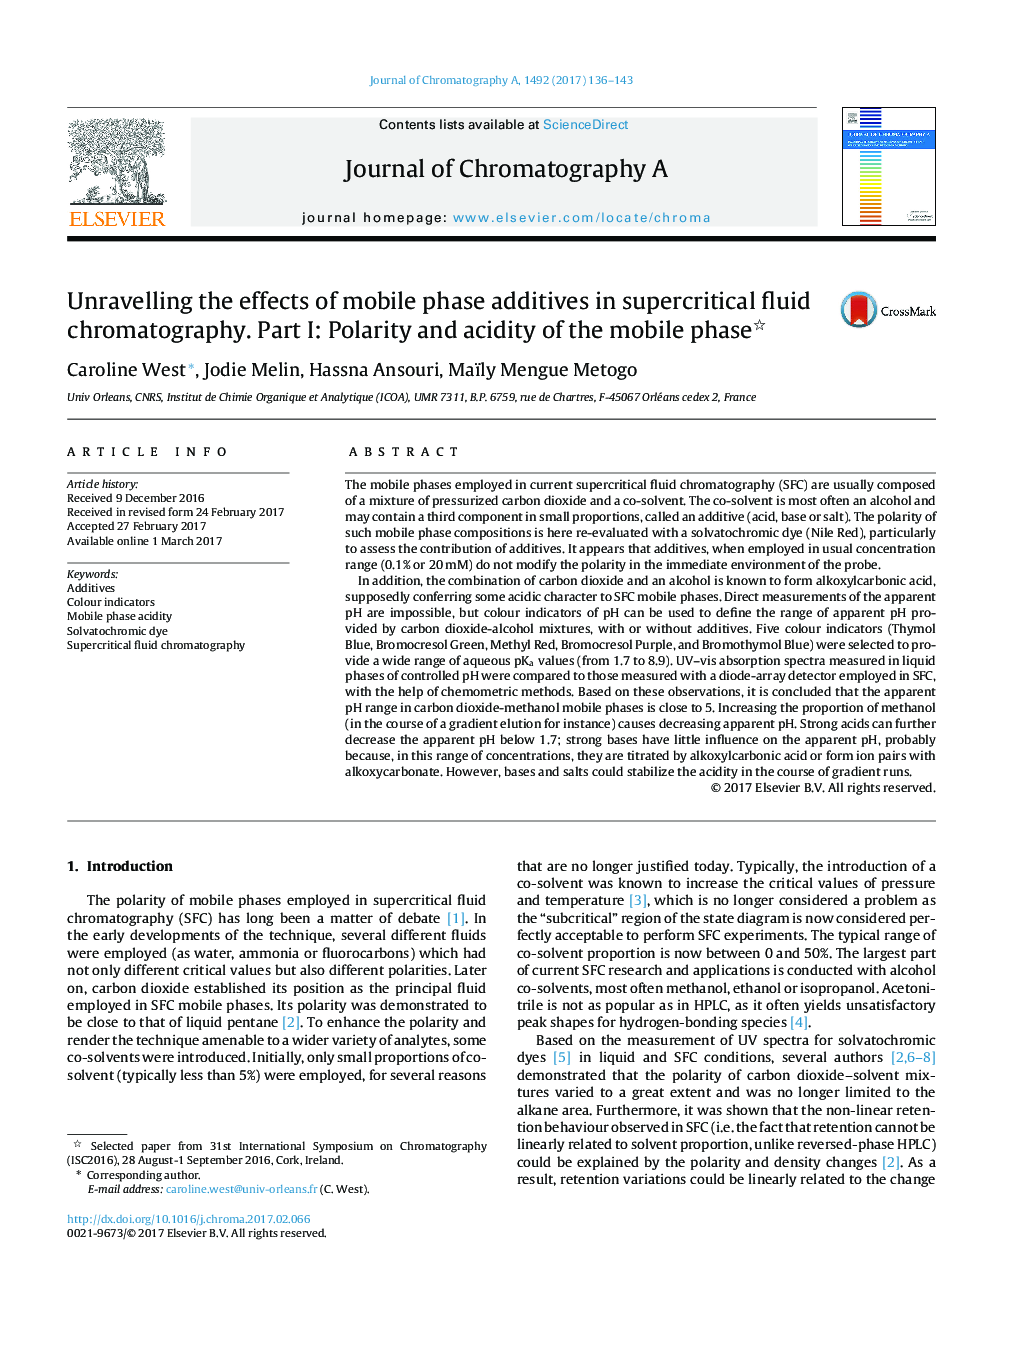 Unravelling the effects of mobile phase additives in supercritical fluid chromatography. Part I: Polarity and acidity of the mobile phase